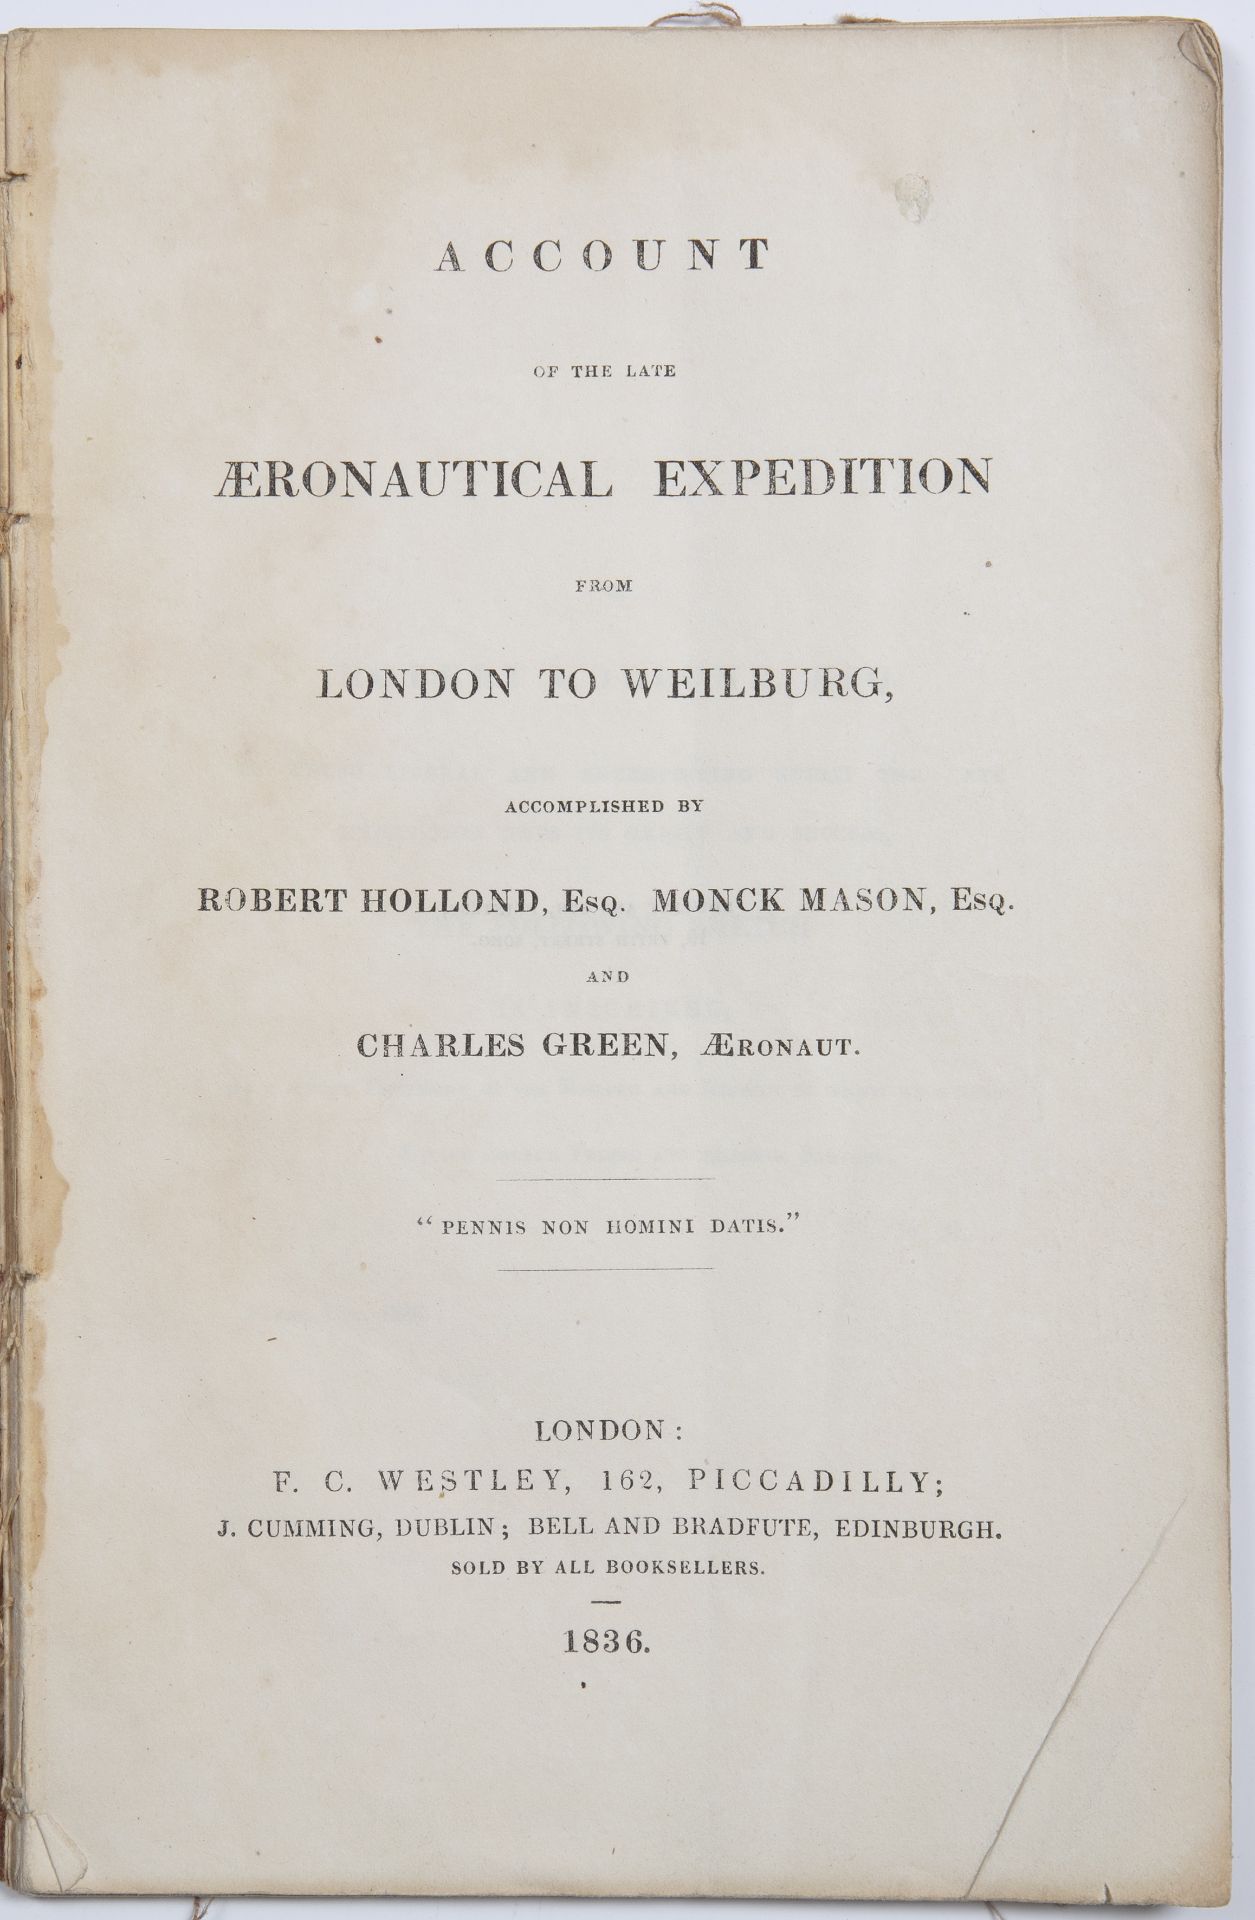 Hollond (Robert), Mason (Monk) and Green (Charles). 'Account of the late Aeronautical Expedition - Image 2 of 2